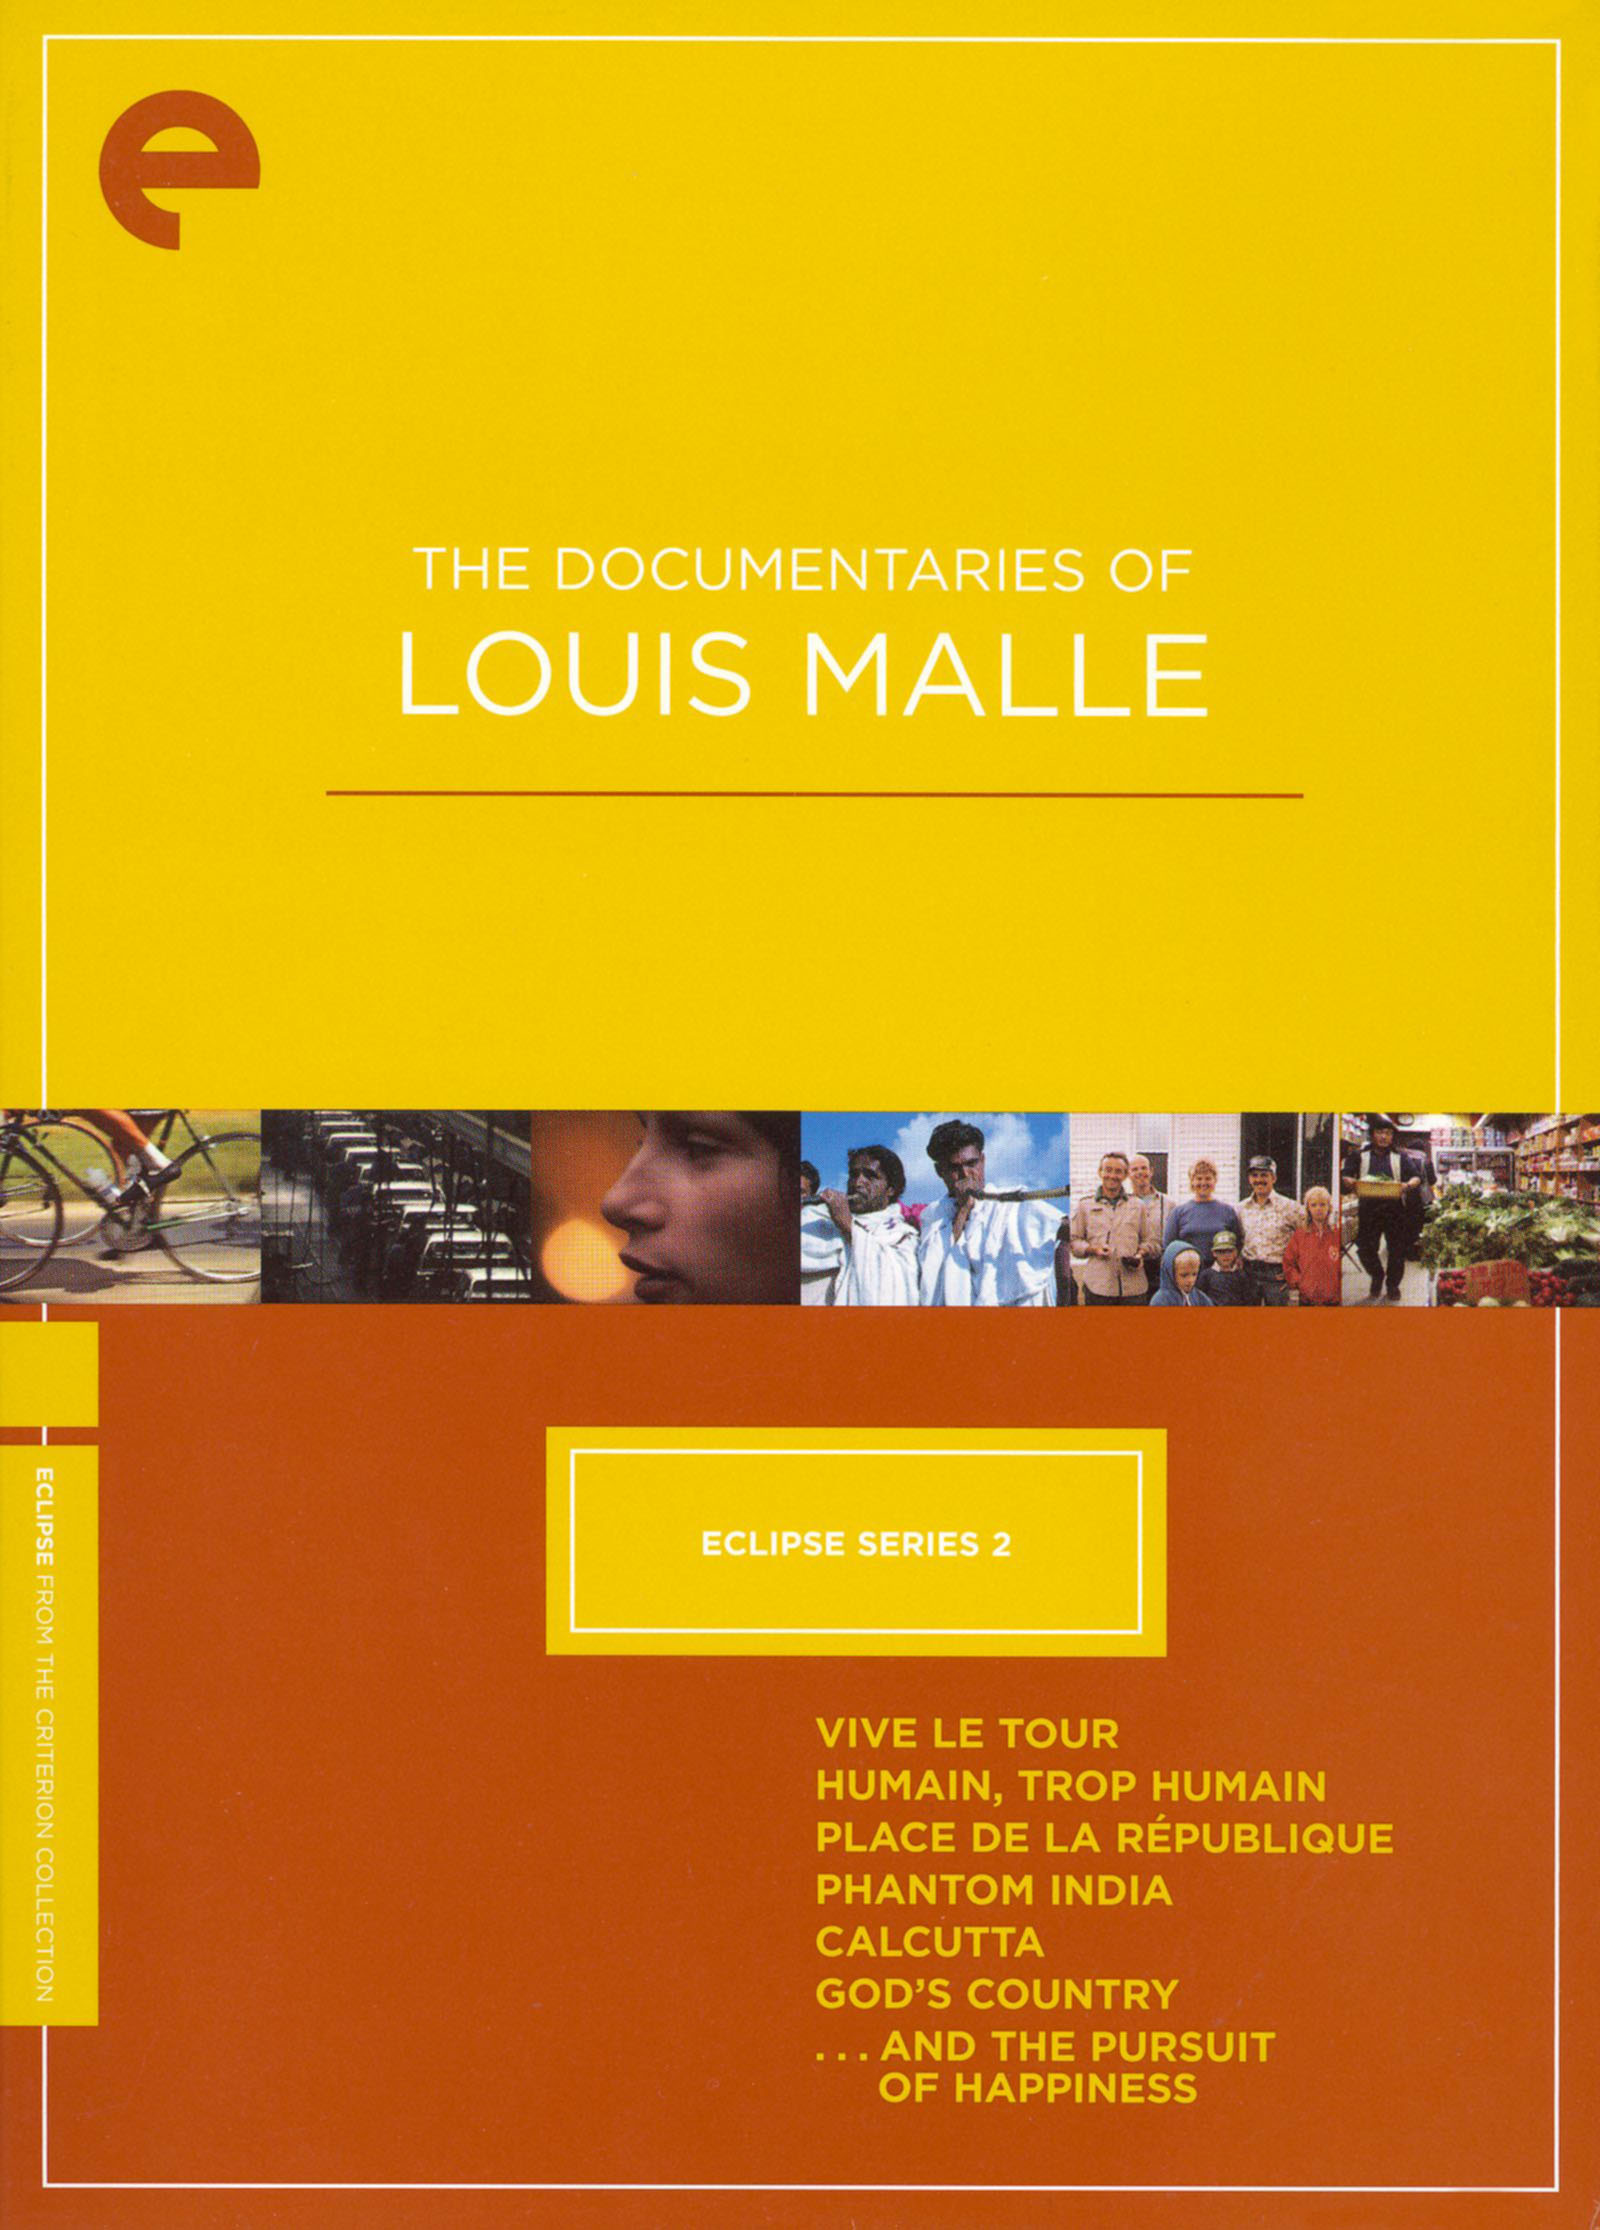  The Louis Malle Collection [Blu-ray] : Movies & TV